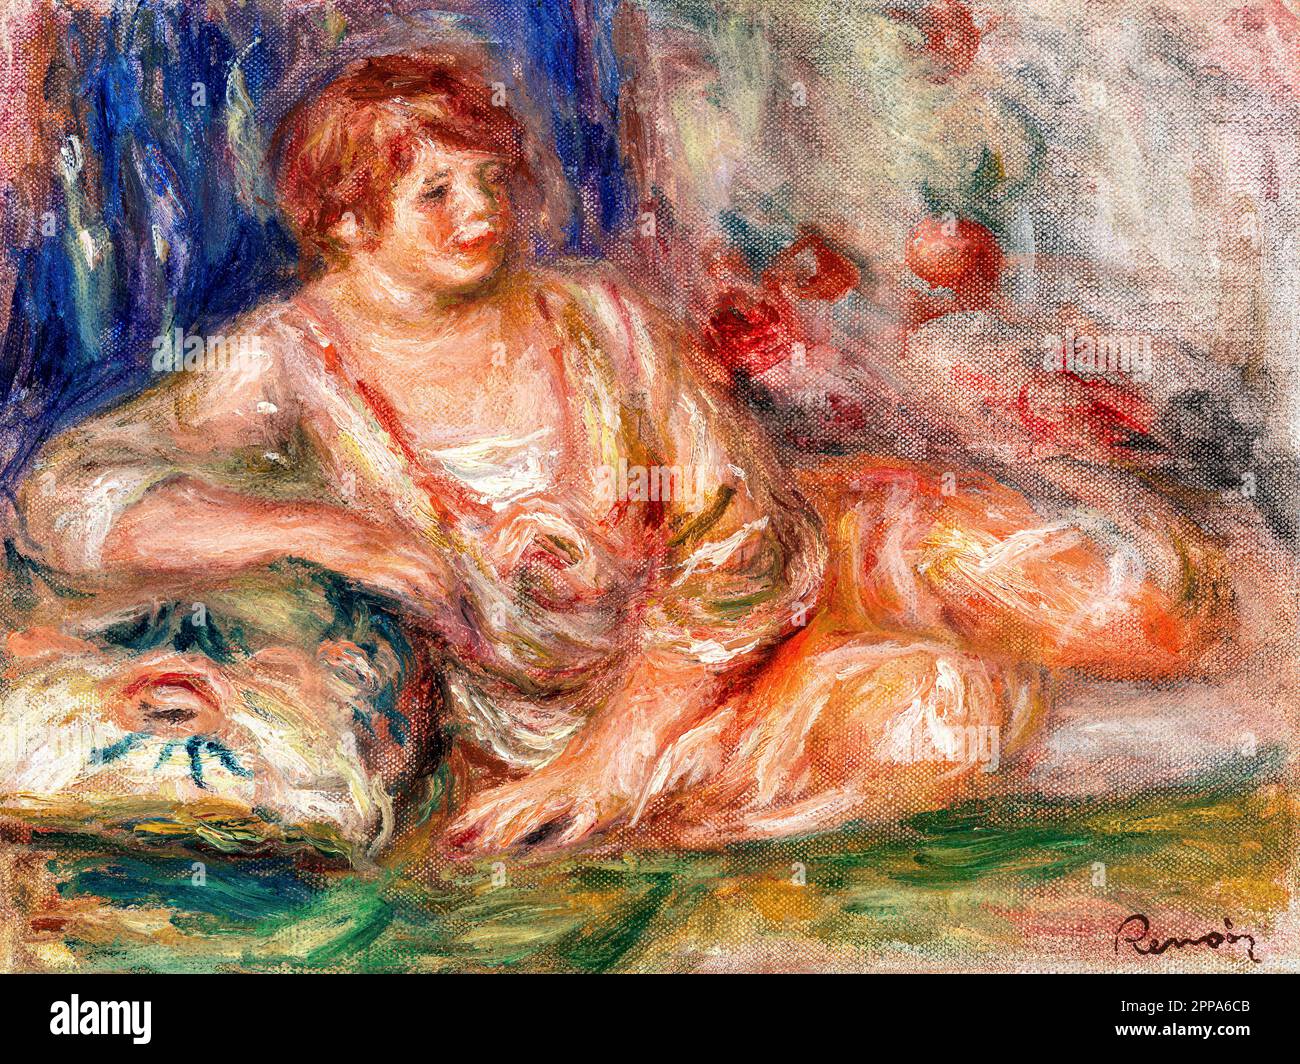 Andreacute; in Pink, Reclining by Pierre-Auguste Renoir. Original from Barnes Foundation. Stock Photo